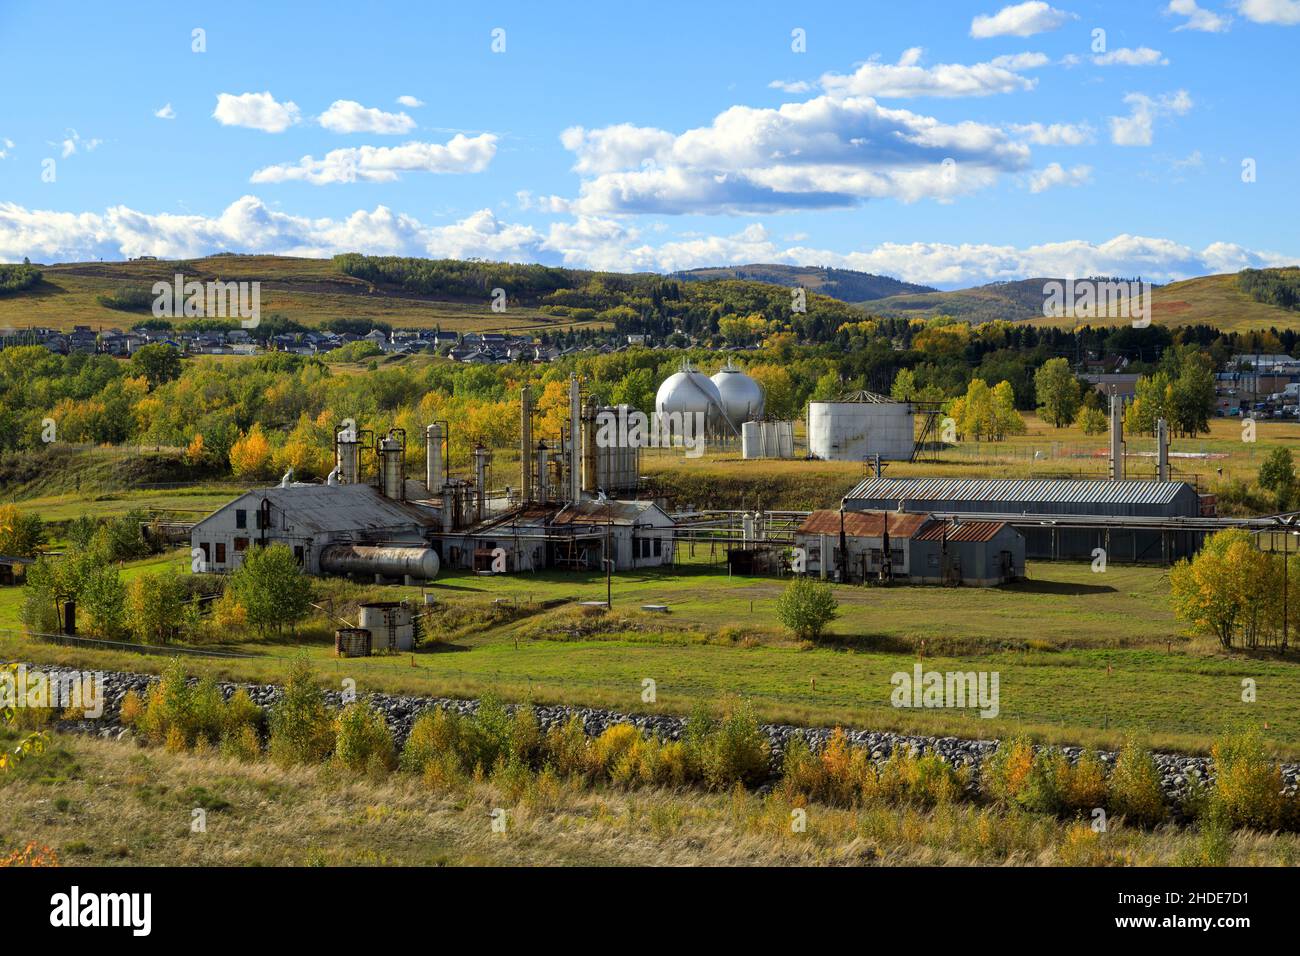 The Turner Valley gas plant, western Canada’s first natural gas processing and refining facility. The Turner Valley gas plant is a Provincial Historic Stock Photo